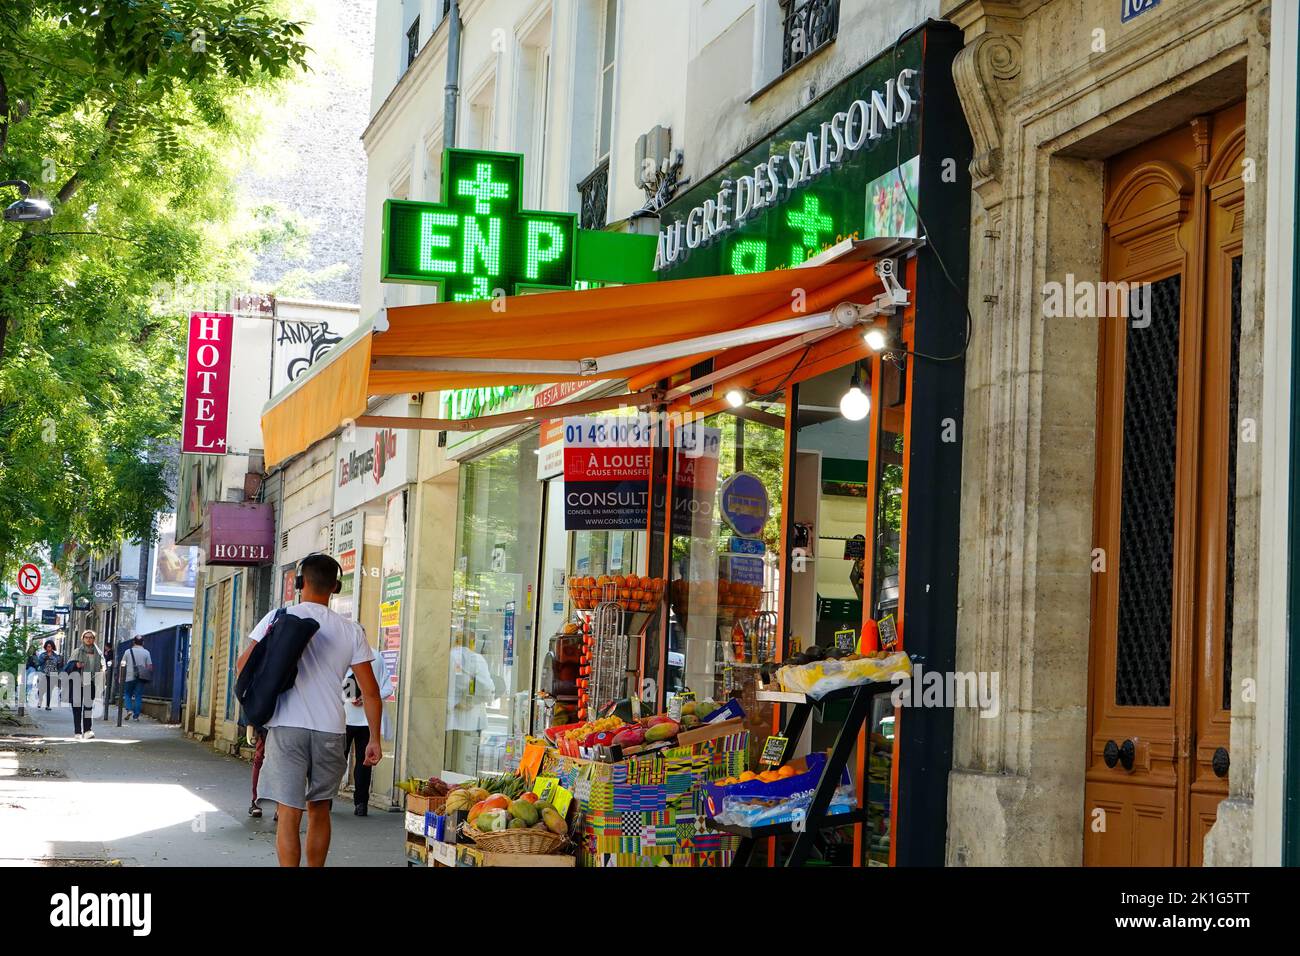 Man in gym clothes walking past fruit and vegetable market and pharmacy, street scene, Alesia area, 14th Arrondissement, Paris, France. Stock Photo